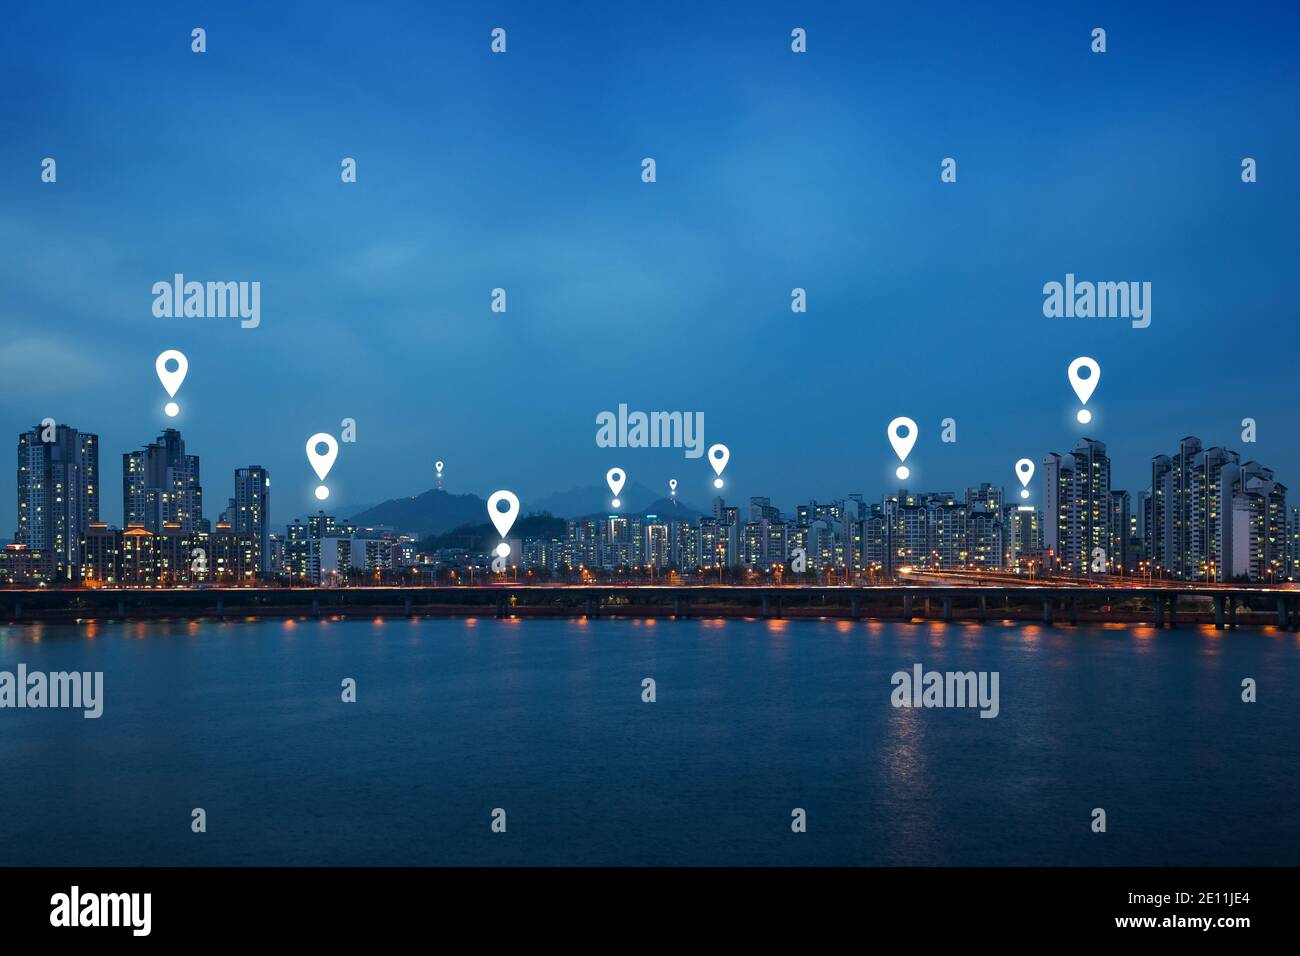 Map pin icons on Seoul cityscape at dusk. Lit residential district and bridge along the Han River in Seoul, South Korea, at night. Copy space. Stock Photo